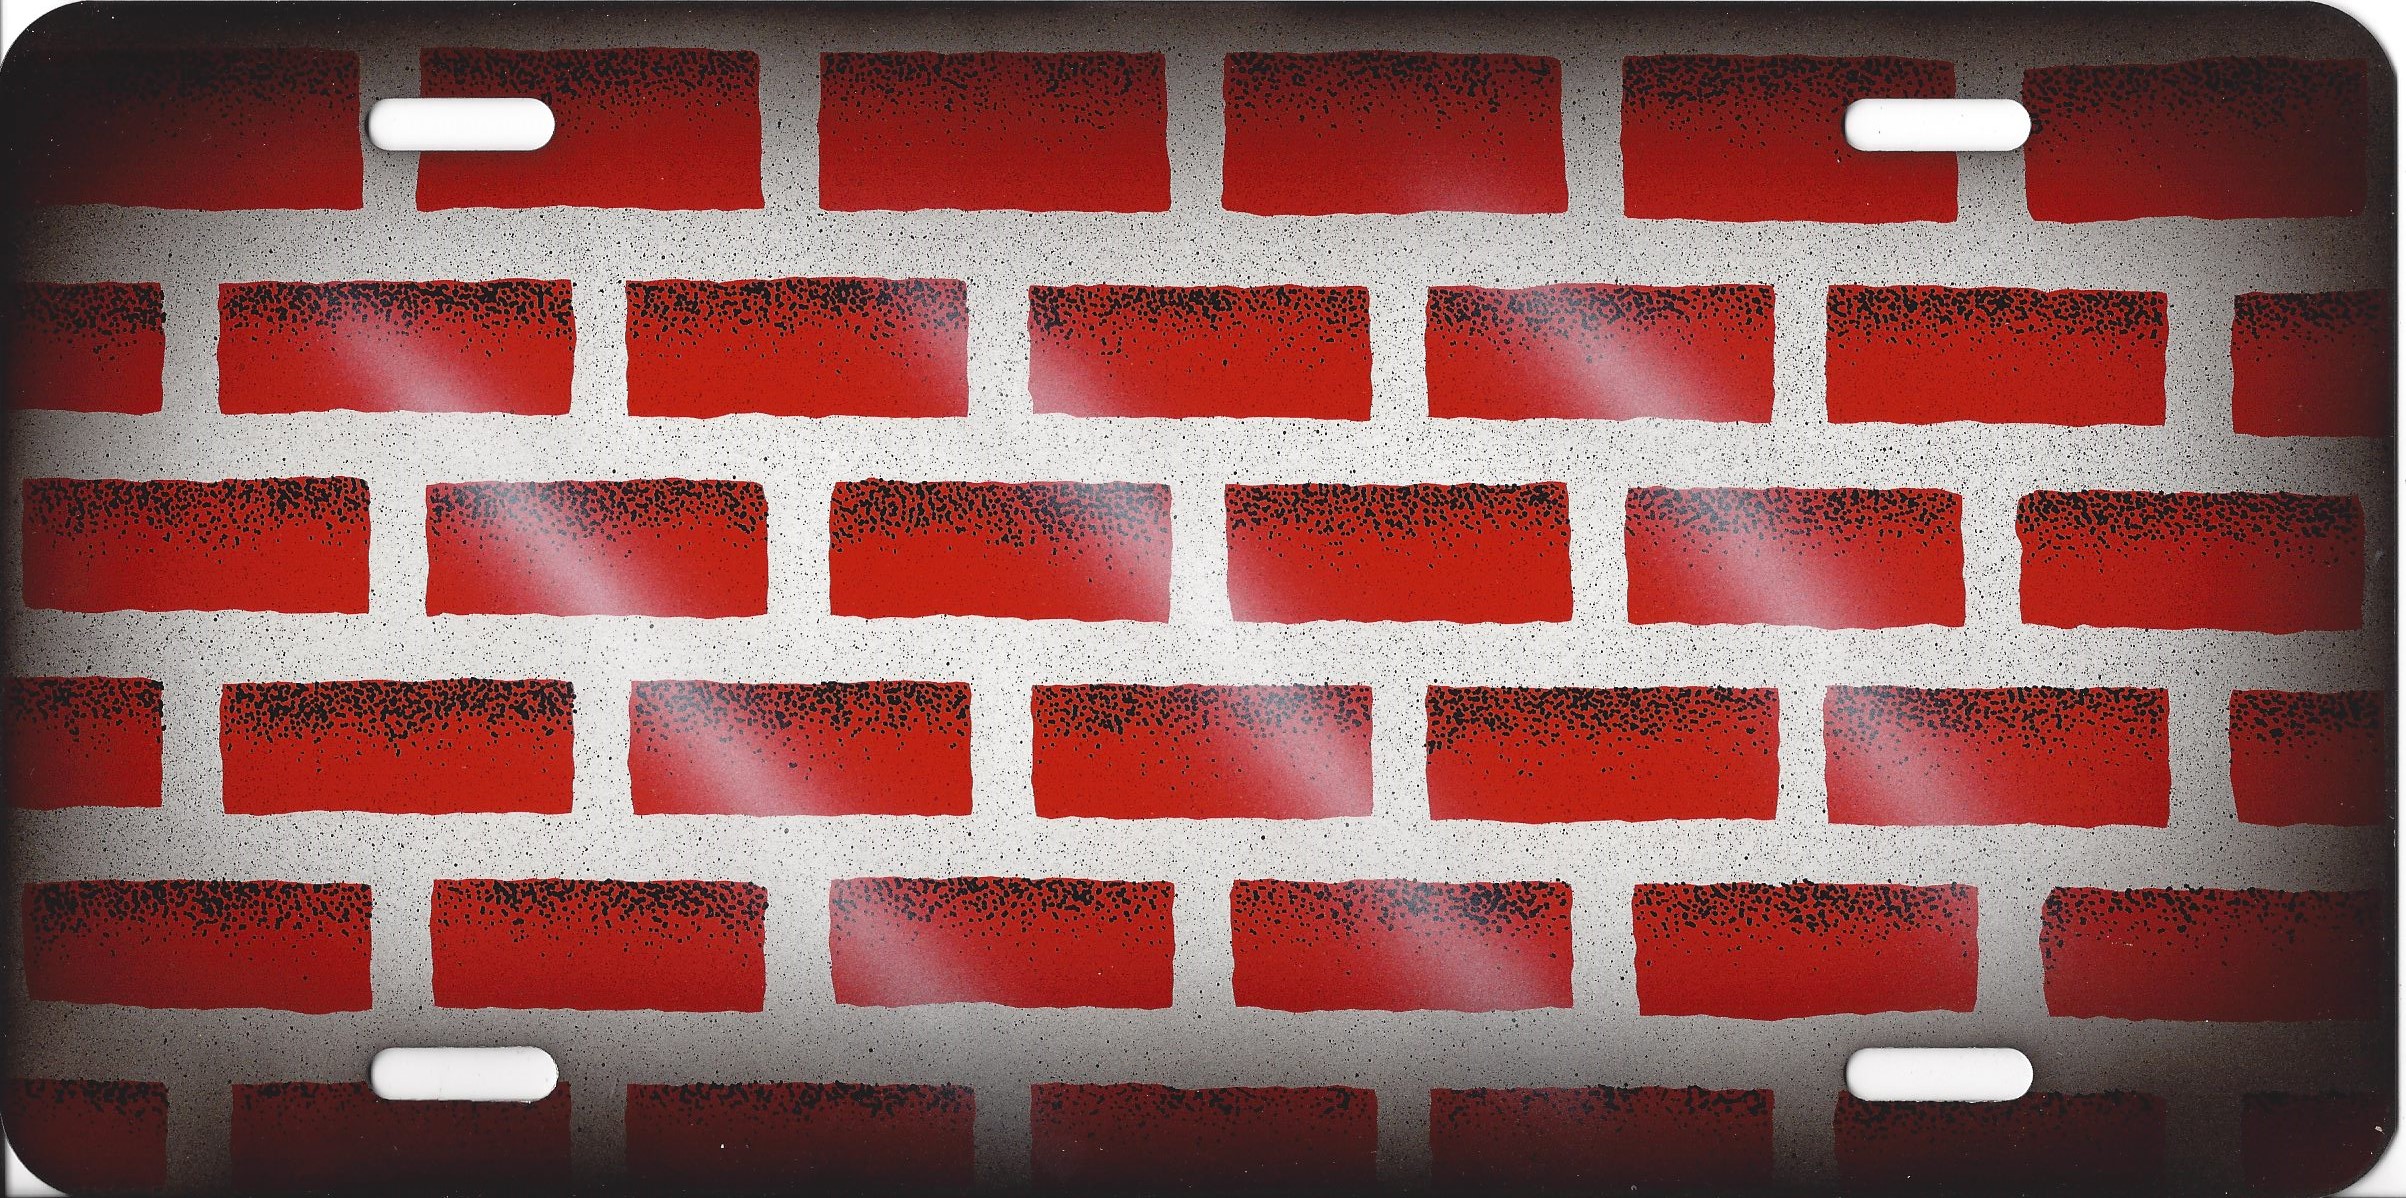 Full Red Brick Wall Photo LICENSE PLATE  Free Personalization on this PLATE